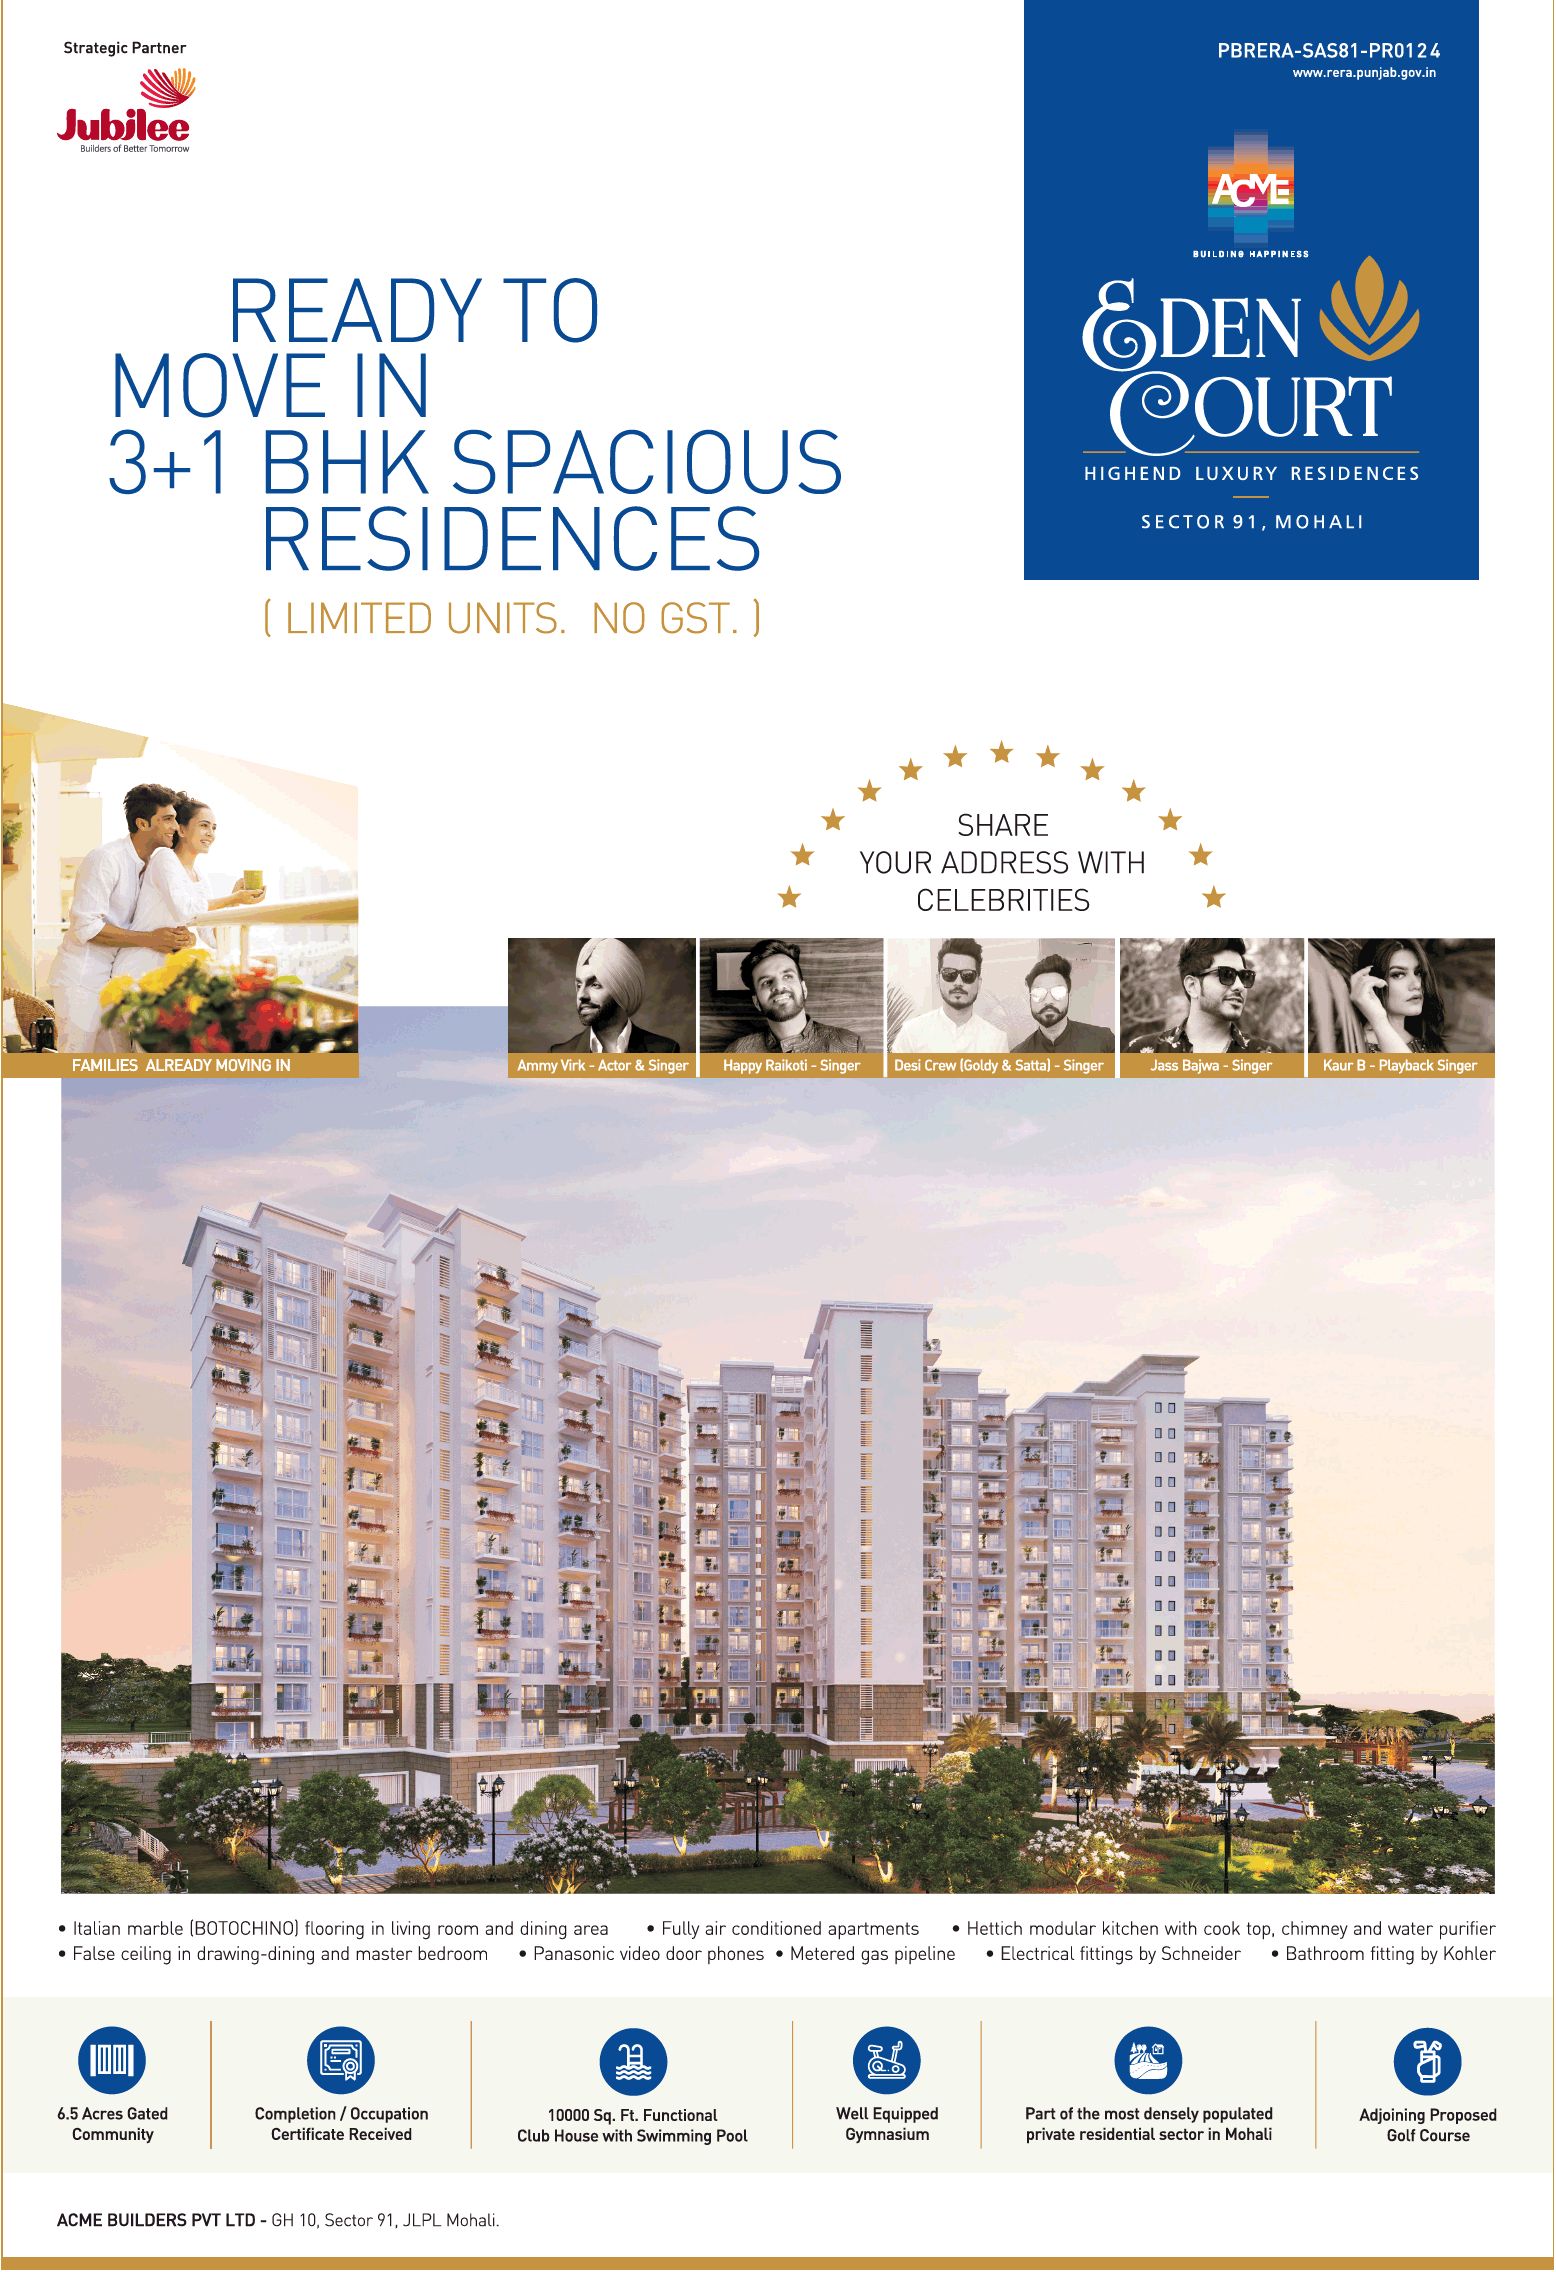 Ready to move in 3+1 bhk spacious residences at Acme Eden Court, Sector 91, Mohali Update